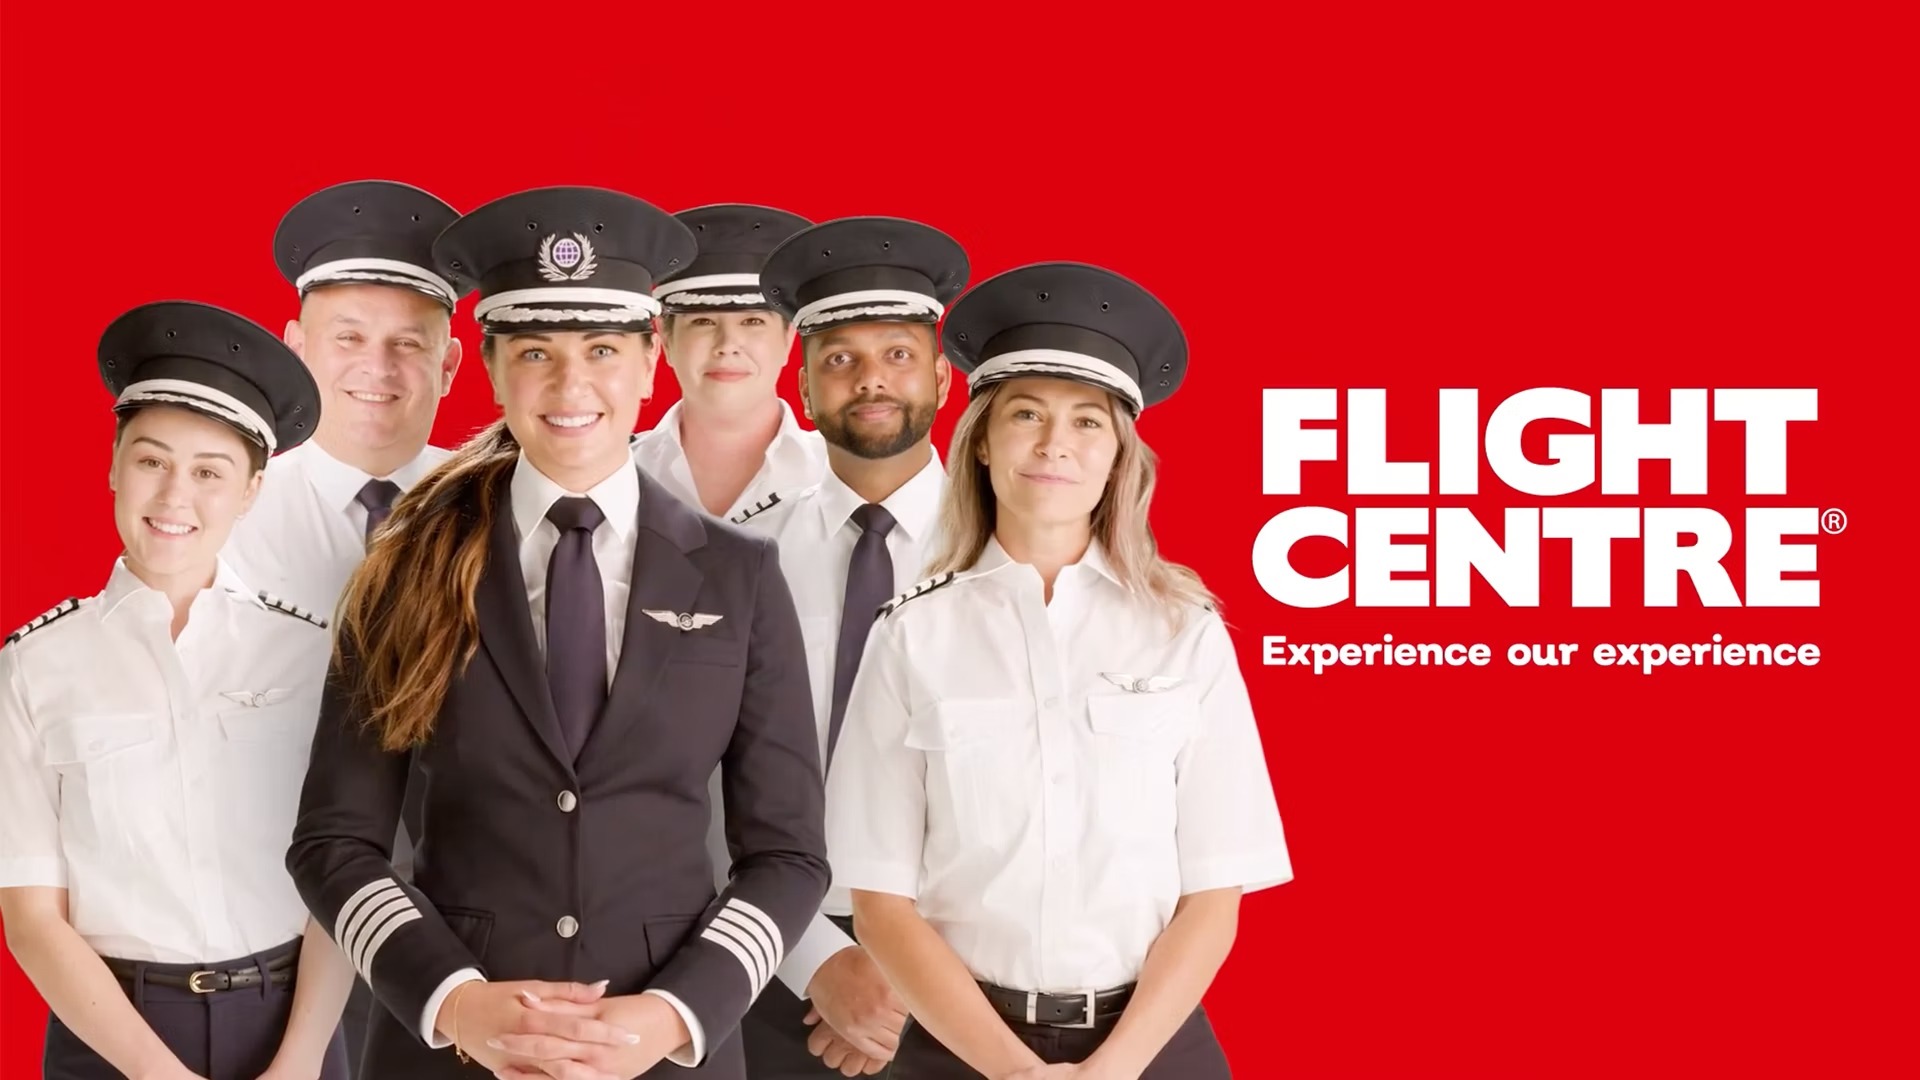 Flight Centre Canada / “Experience Our Experience”